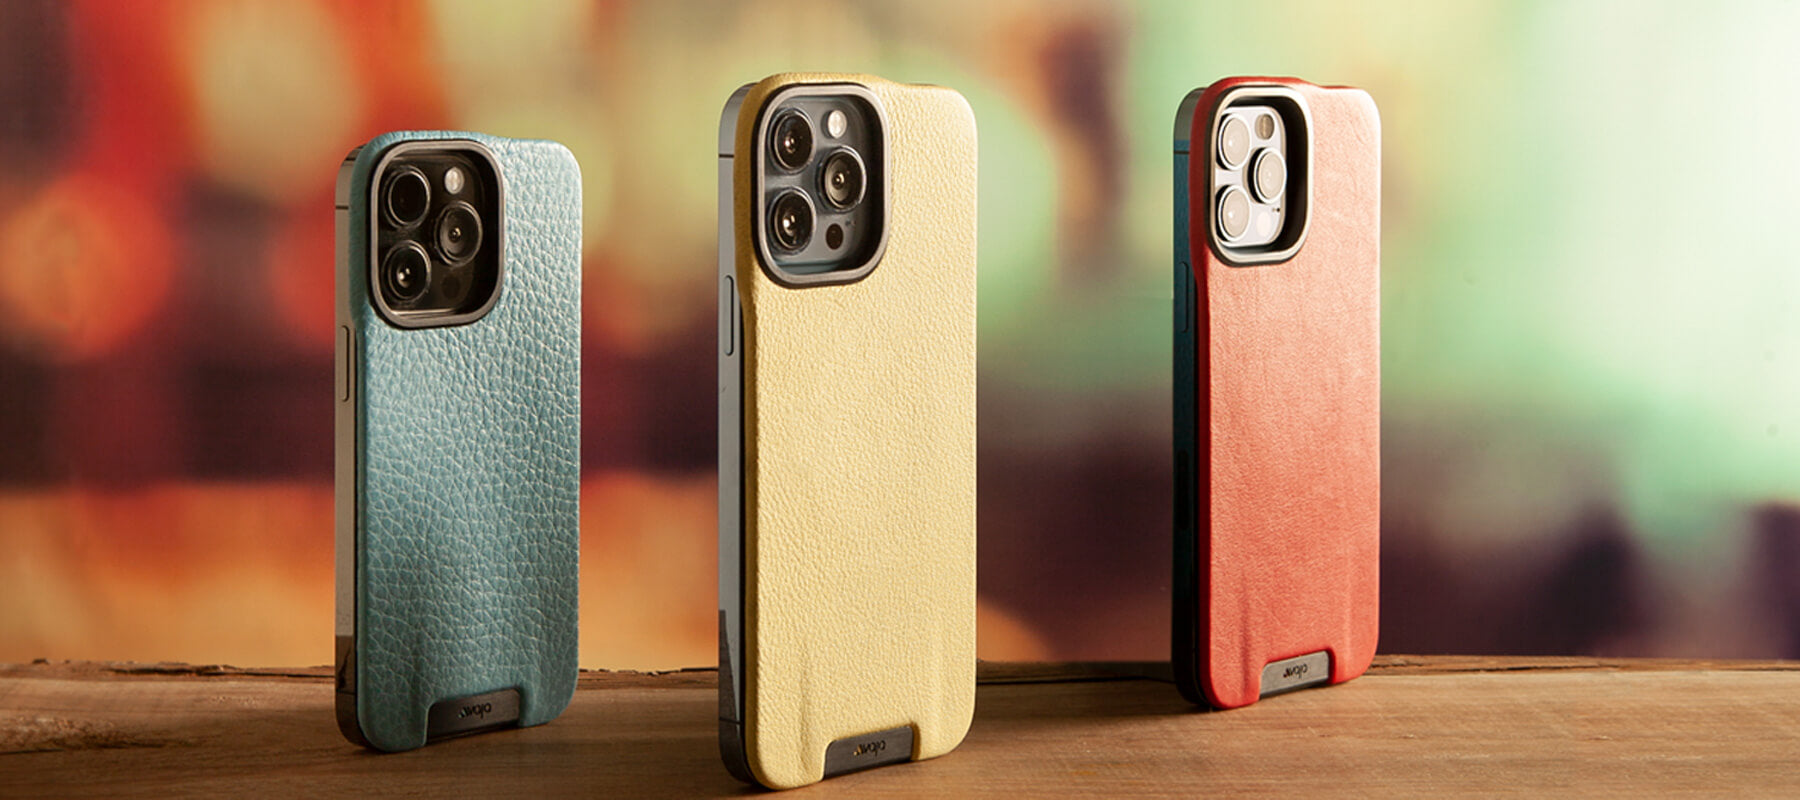 Custom iPhone Leather Cases that Protect Your iPhone